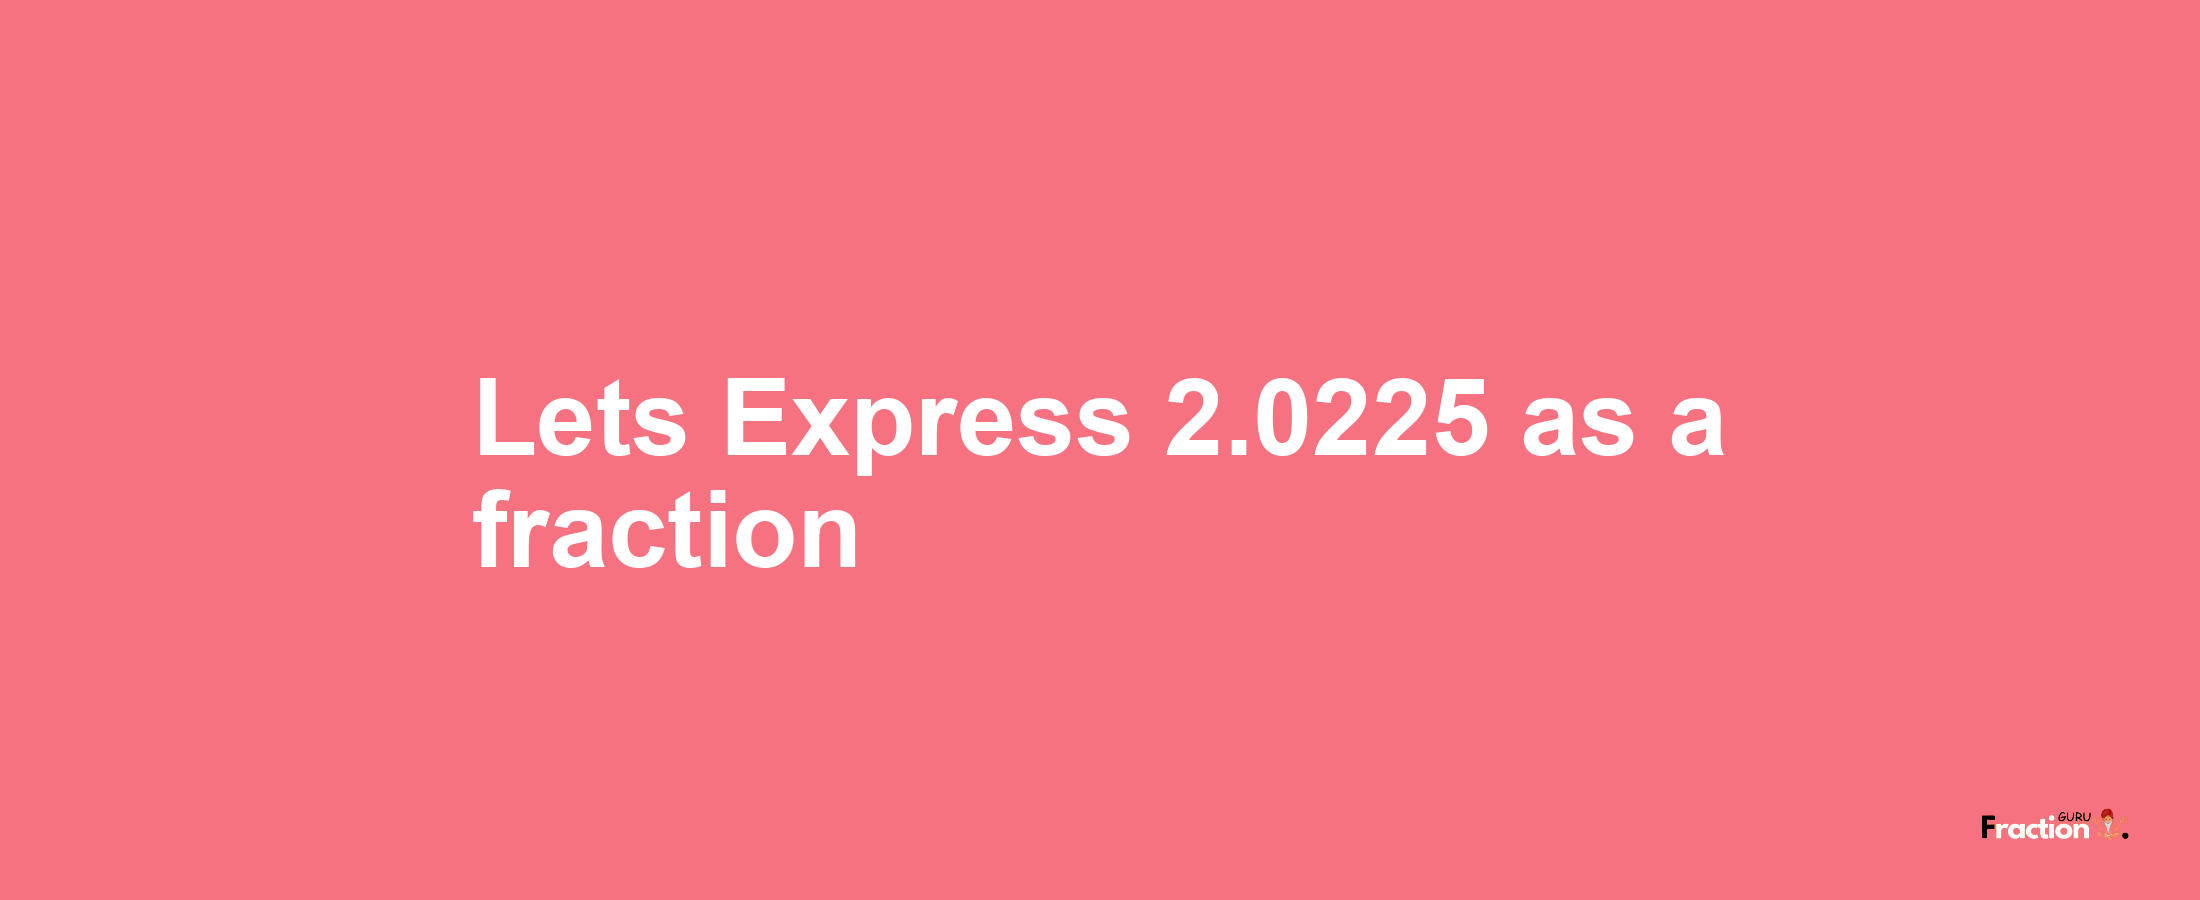 Lets Express 2.0225 as afraction